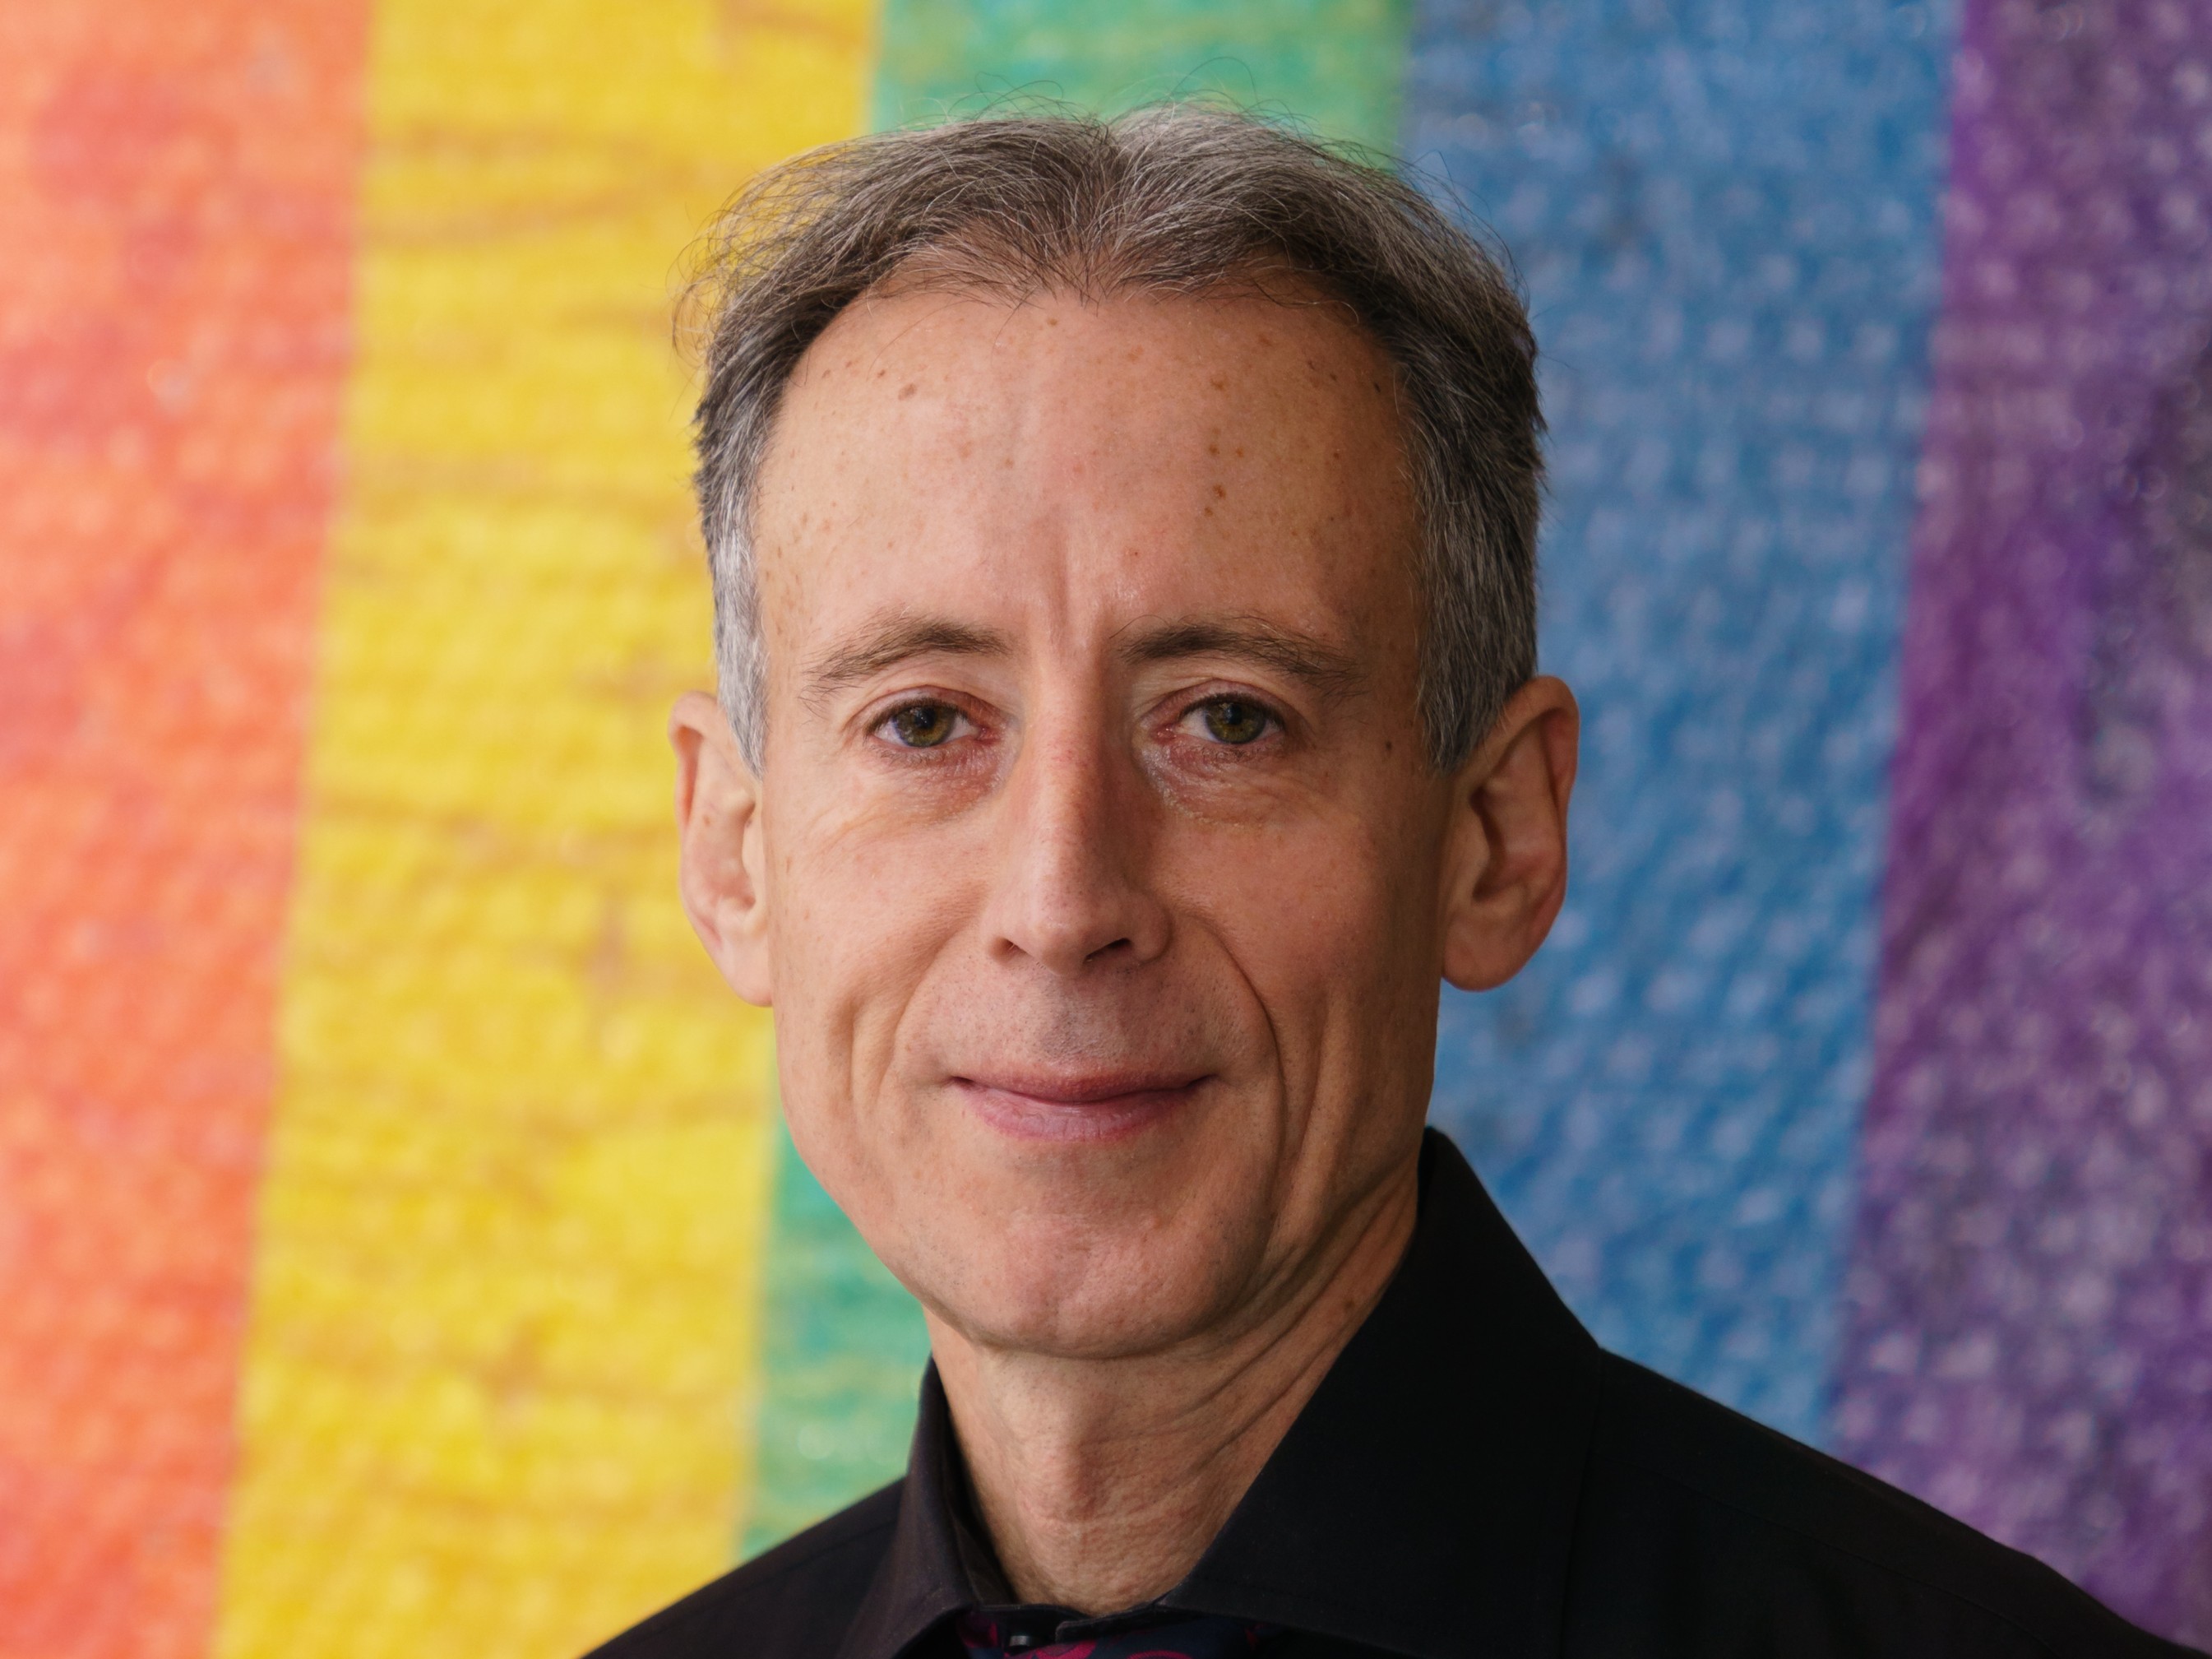 Human rights campaigner Peter Tatchell to receive honorary degree